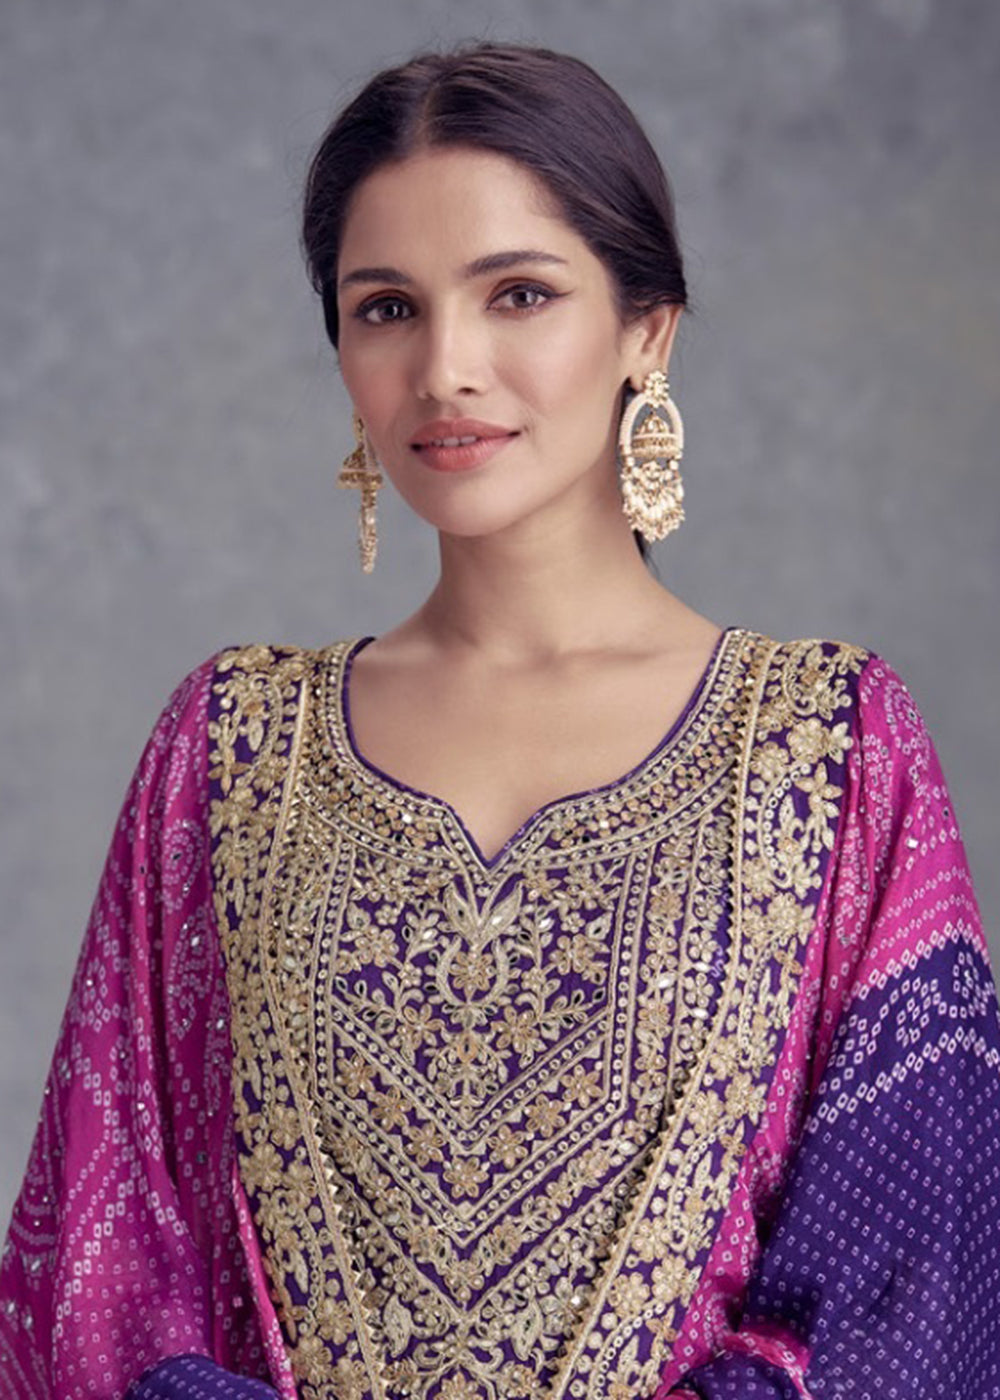 Buy Now Purple Embroidered Chinnon Wedding Style Palazzo Suit Online in USA, UK, Canada, Germany, Australia & Worldwide at Empress Clothing.